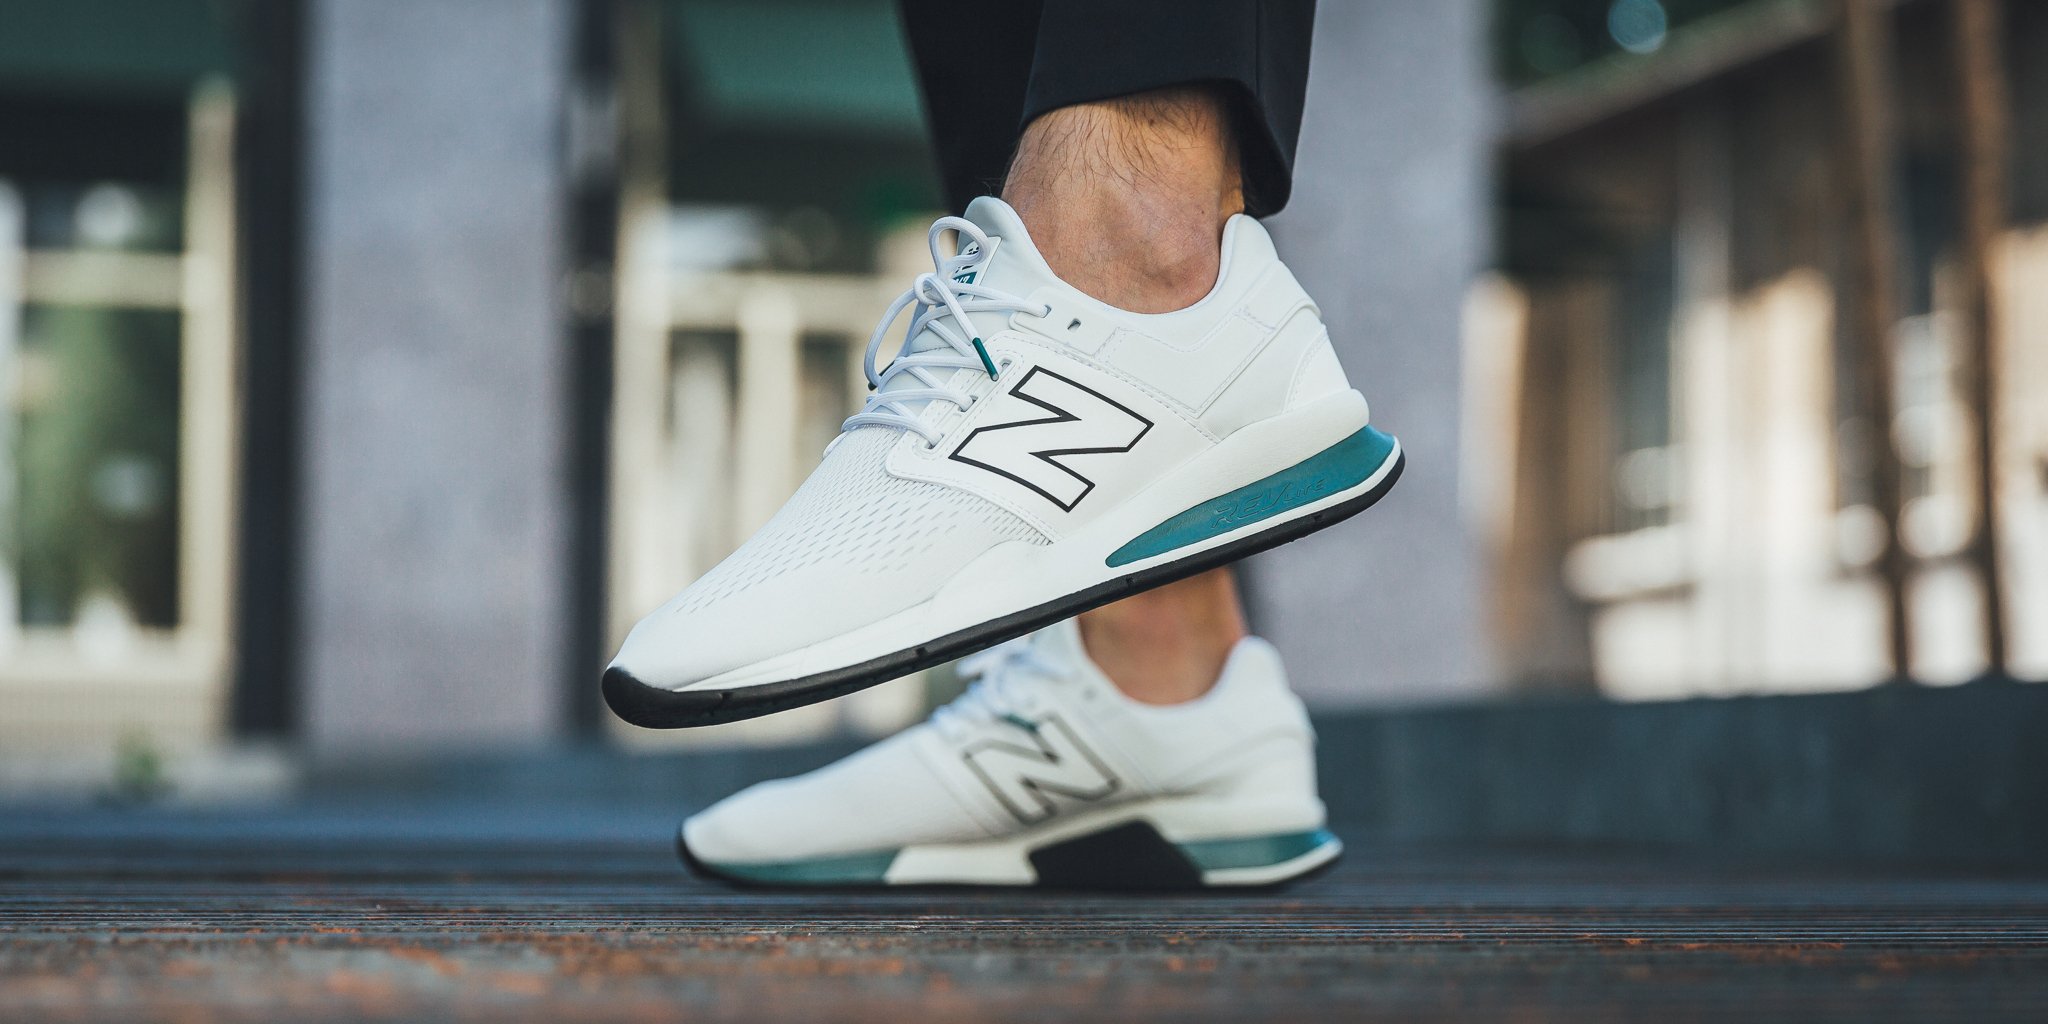 Titolo Twitter: "#outnow ❗️New Balance 247 "Tritium Pack" - White SHOP here ➡️ https://t.co/LKiPPdoJGL #247 #nb247 #newbalance247 # #trtiumpack https://t.co/ikNa0BX2Kl" / Twitter